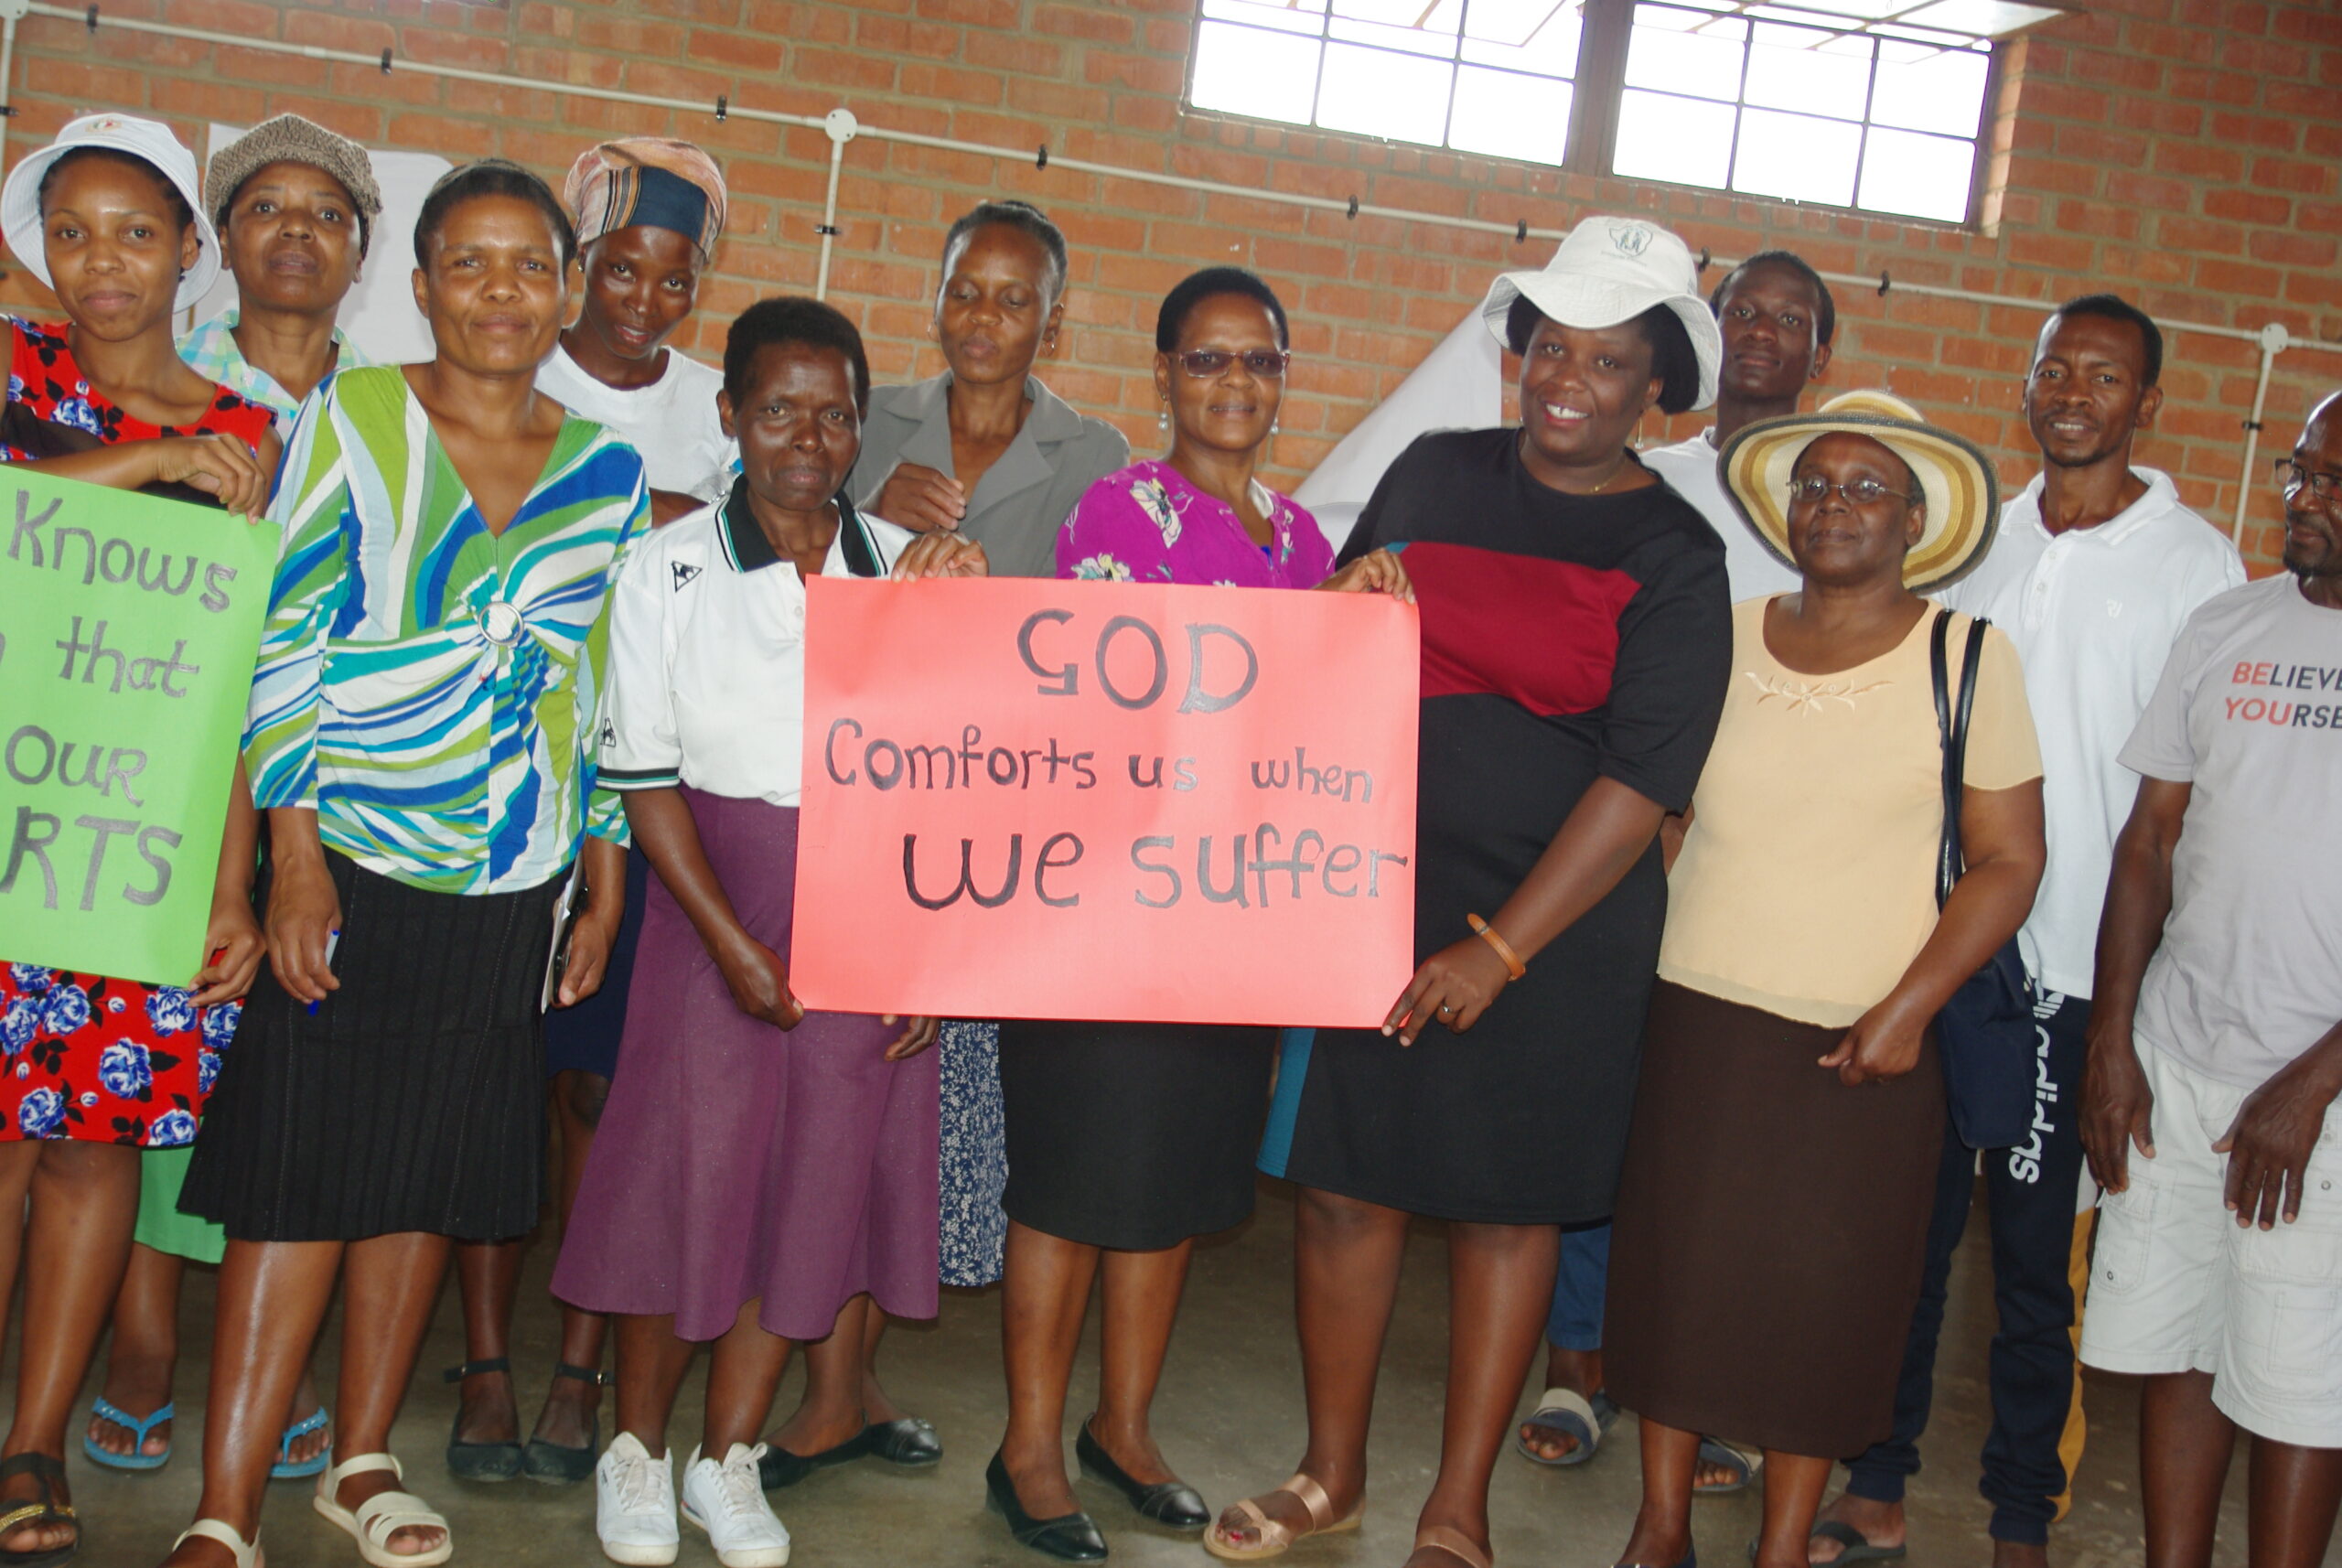 The group from BICC Trenance stands together to hold a sign reading, "God comforts us when we suffer."